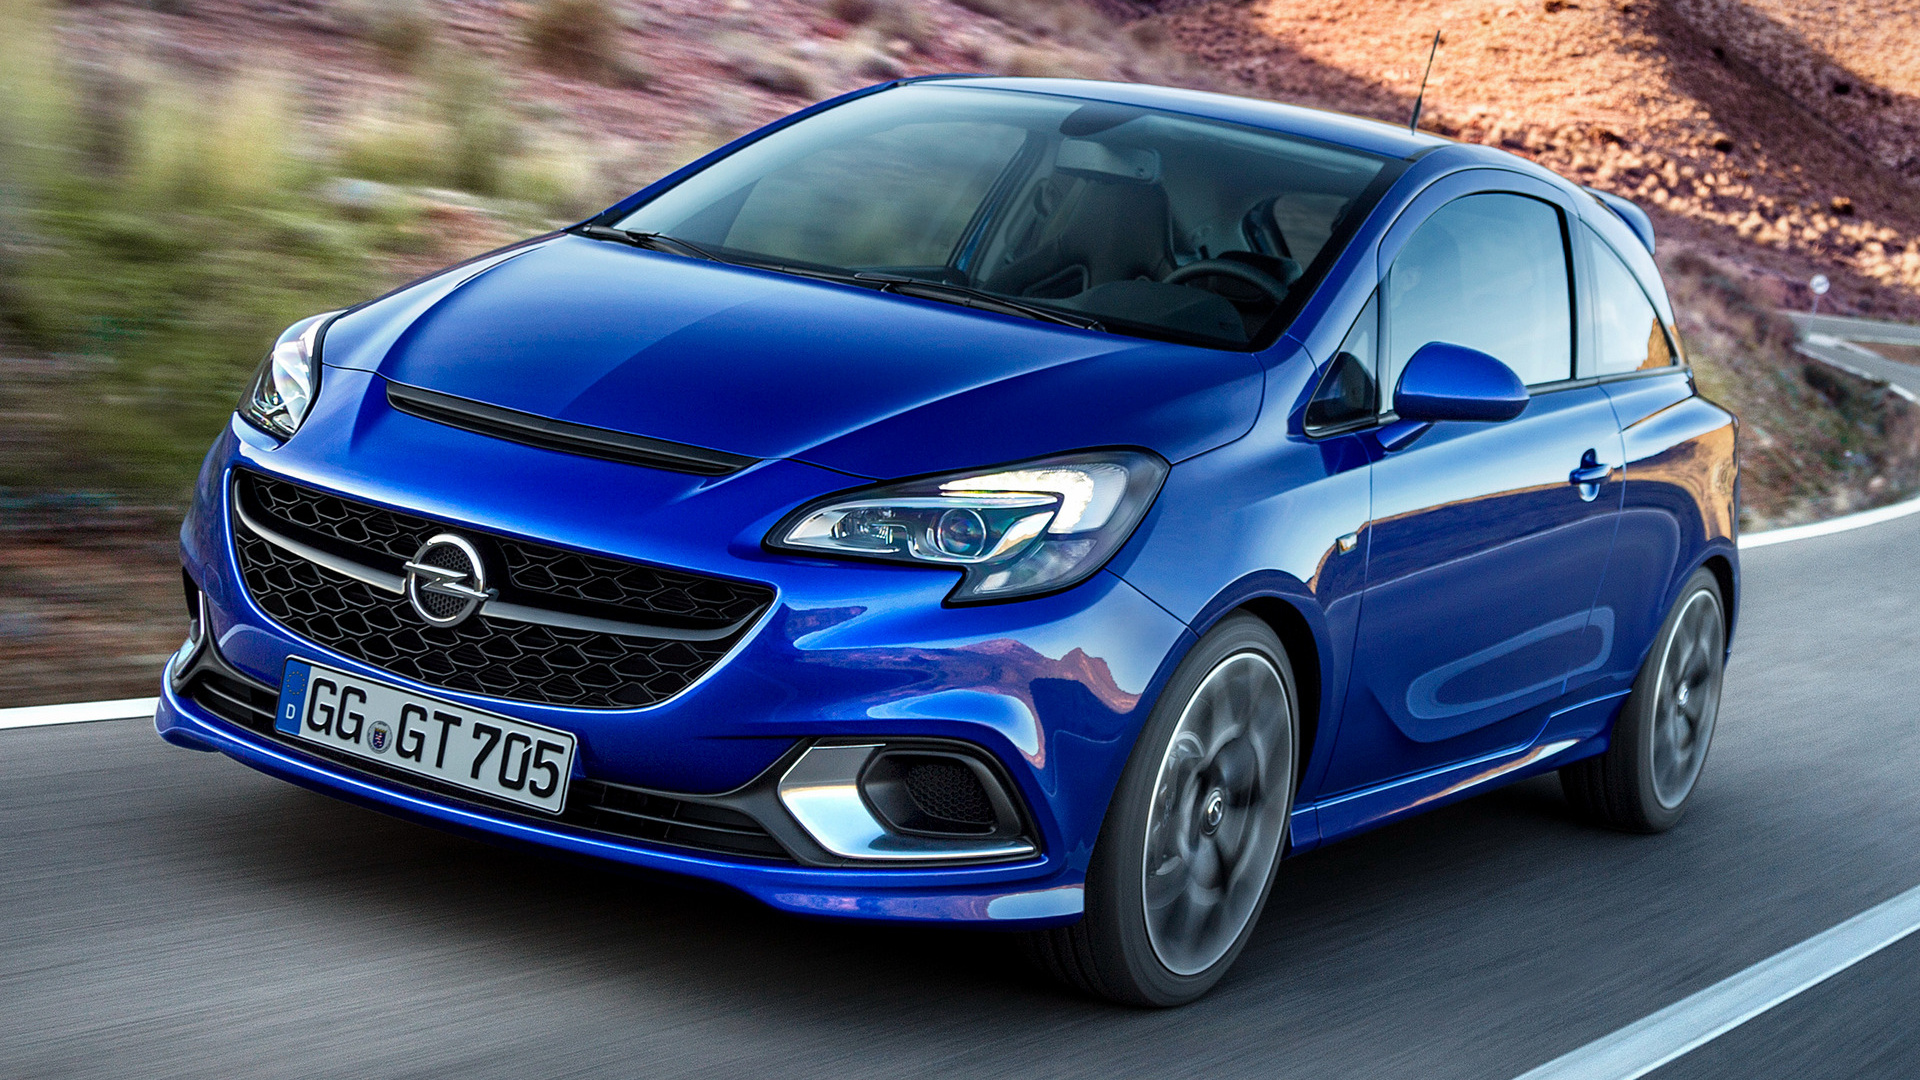 Opel Corsa Wallpaper HD Photo, Wallpaper and other Image